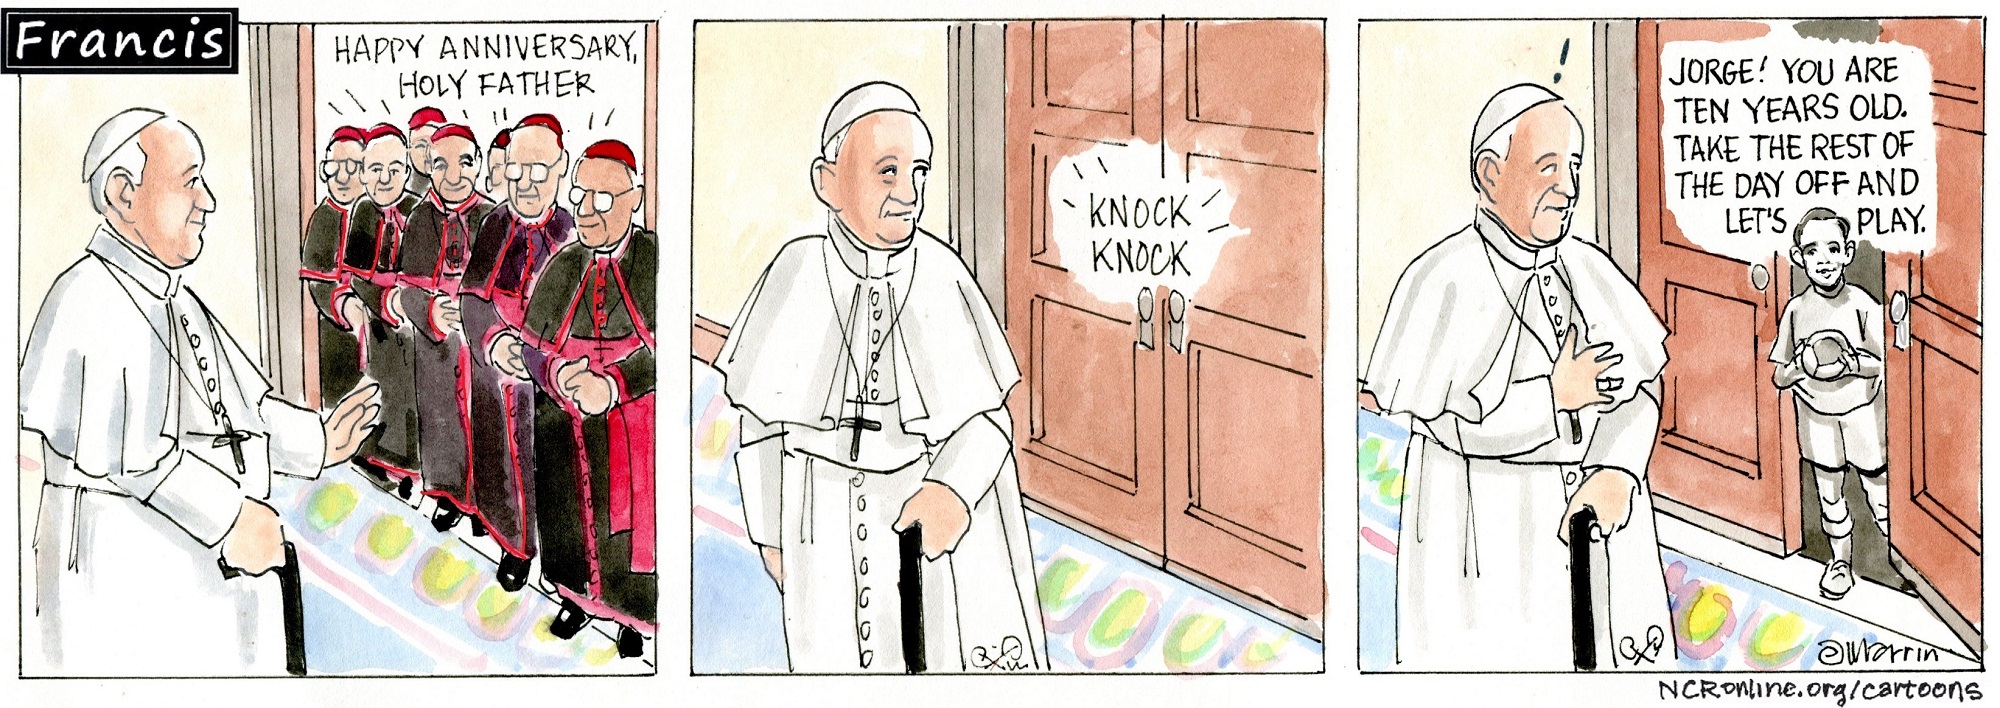 Francis, the comic strip: Francis gets a surprise visit for his anniversary.